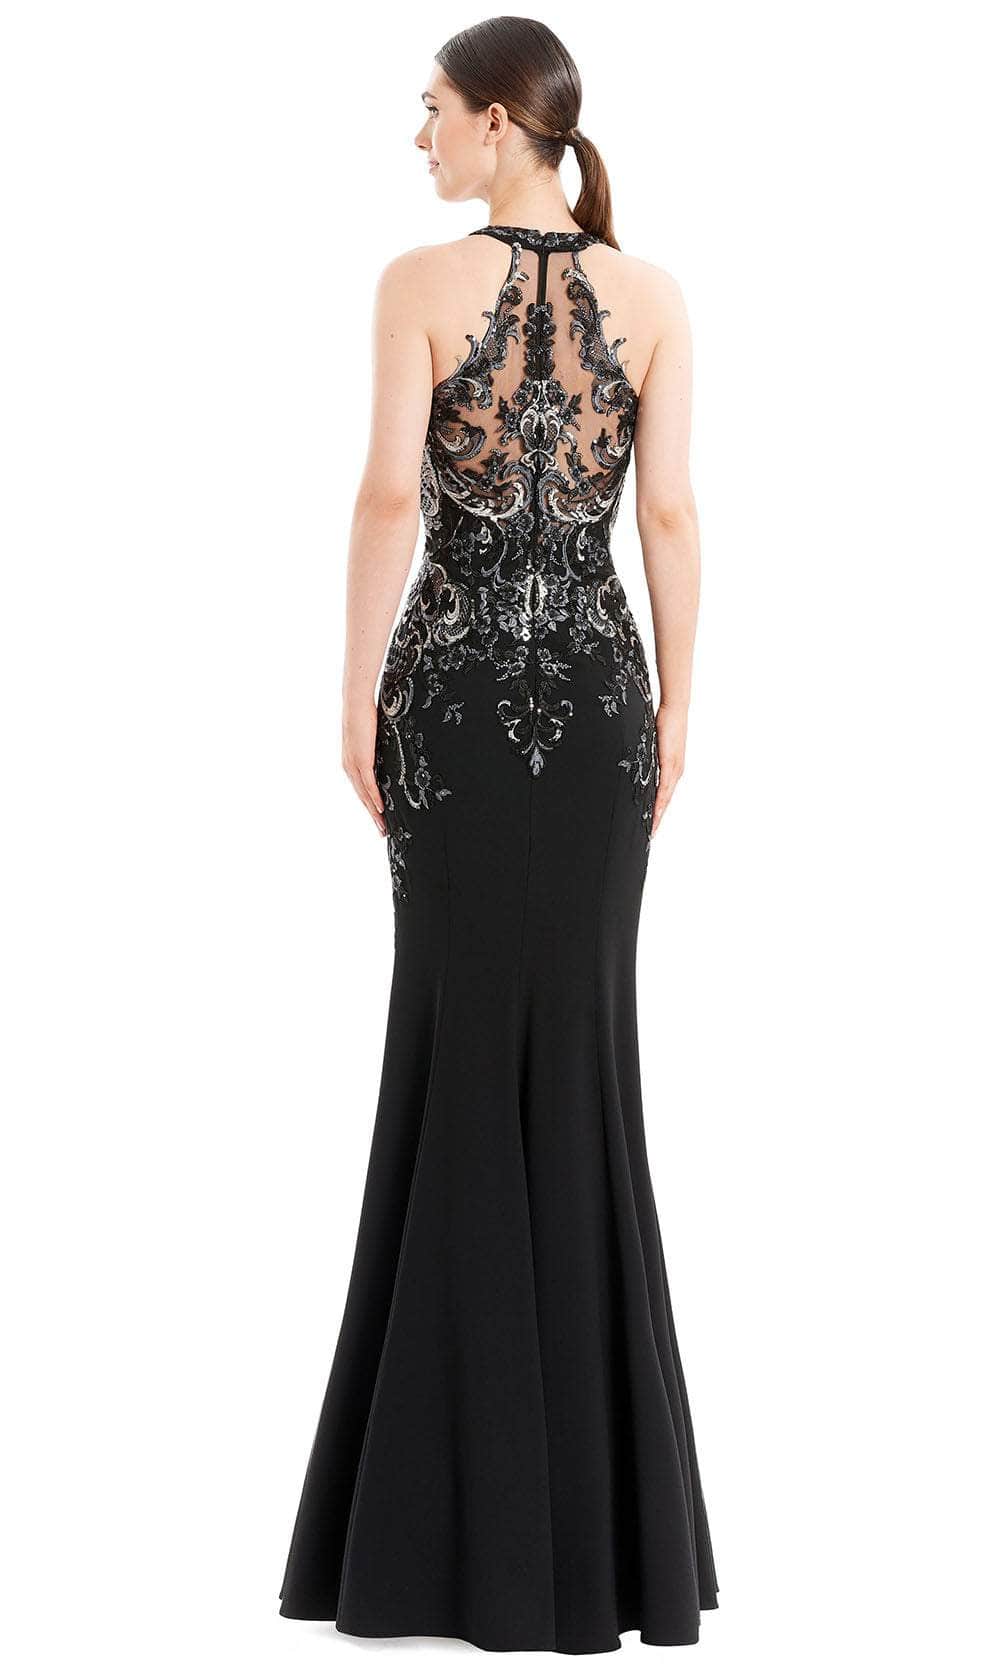 Alexander by Daymor, Alexander by Daymor 1665 - Illusion Back Evening Gown